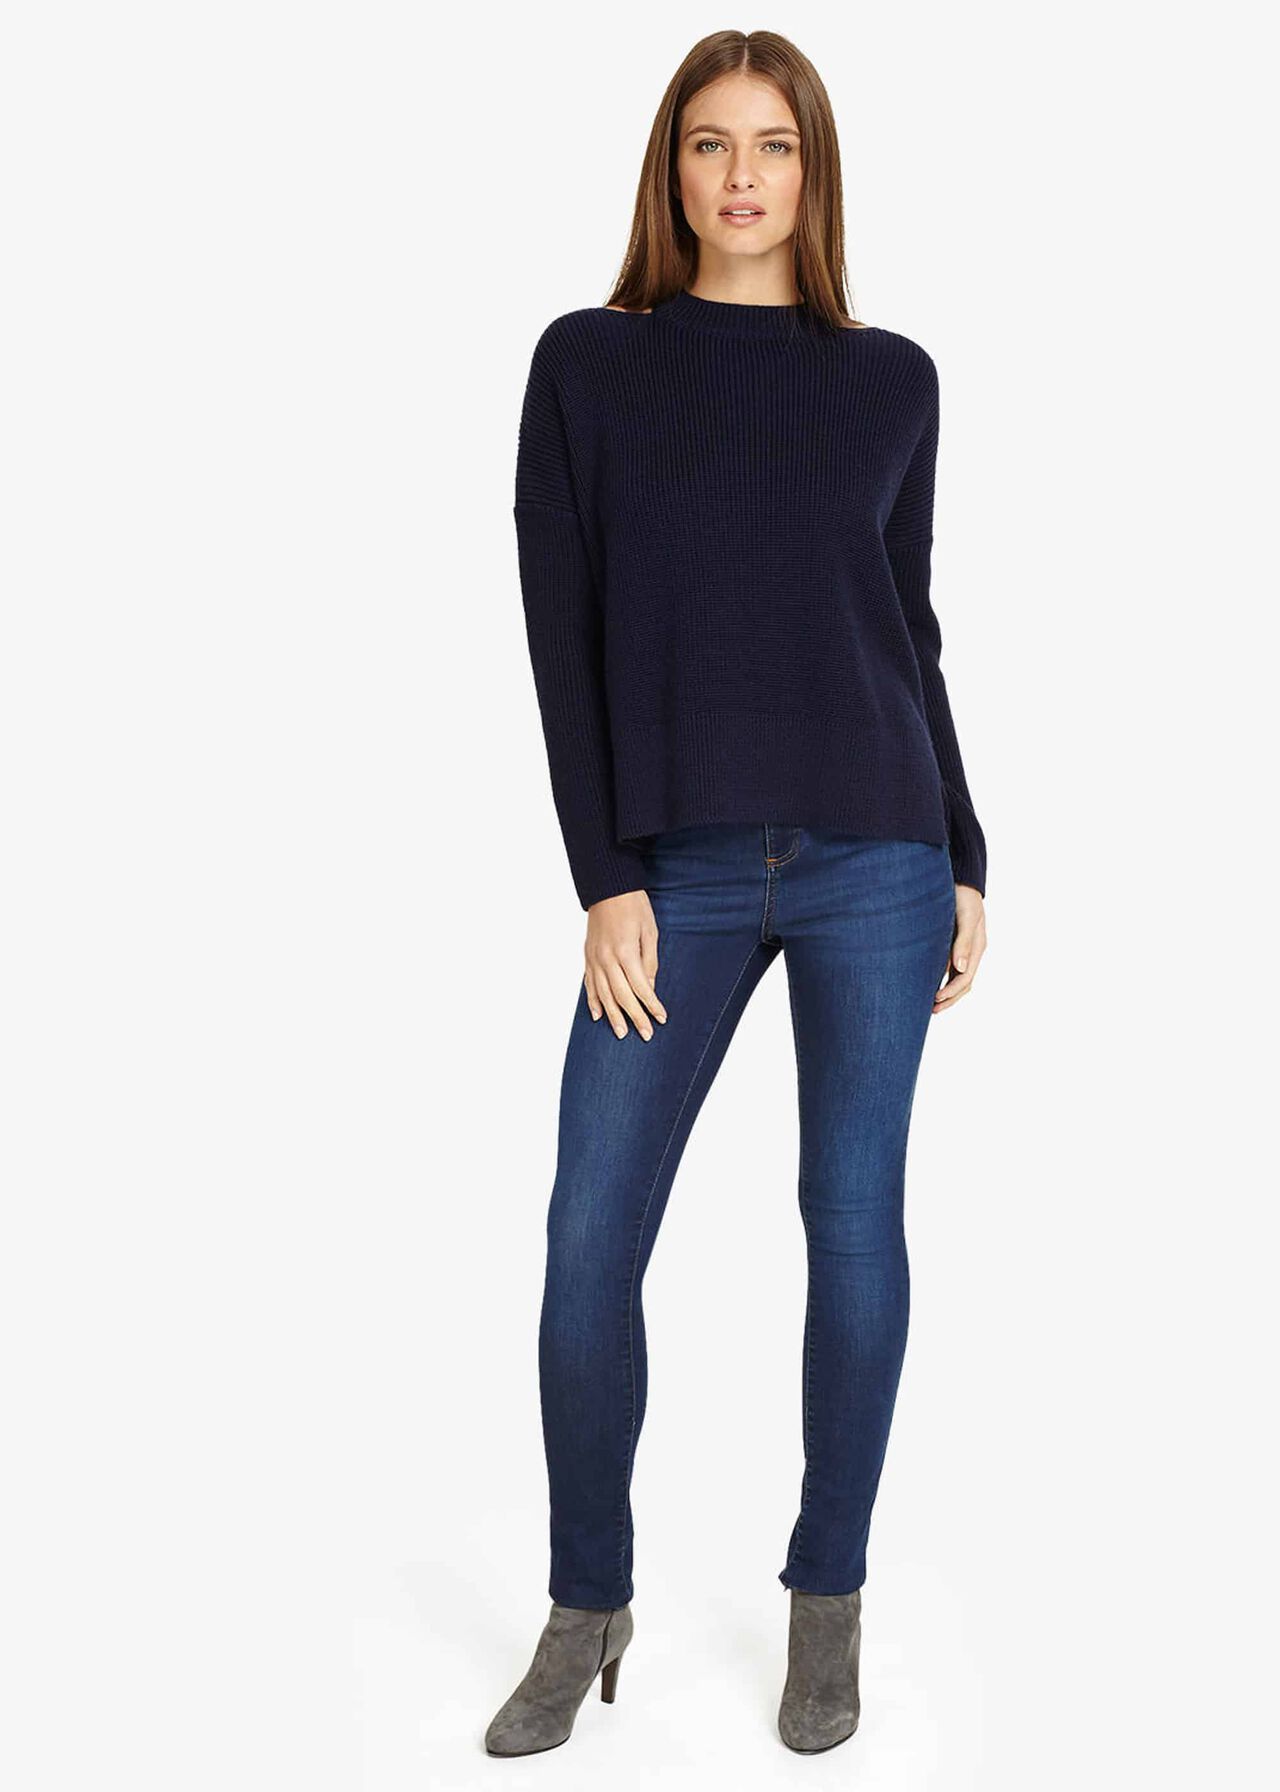 Cammi Cut Neck Chunky Knitted Jumper